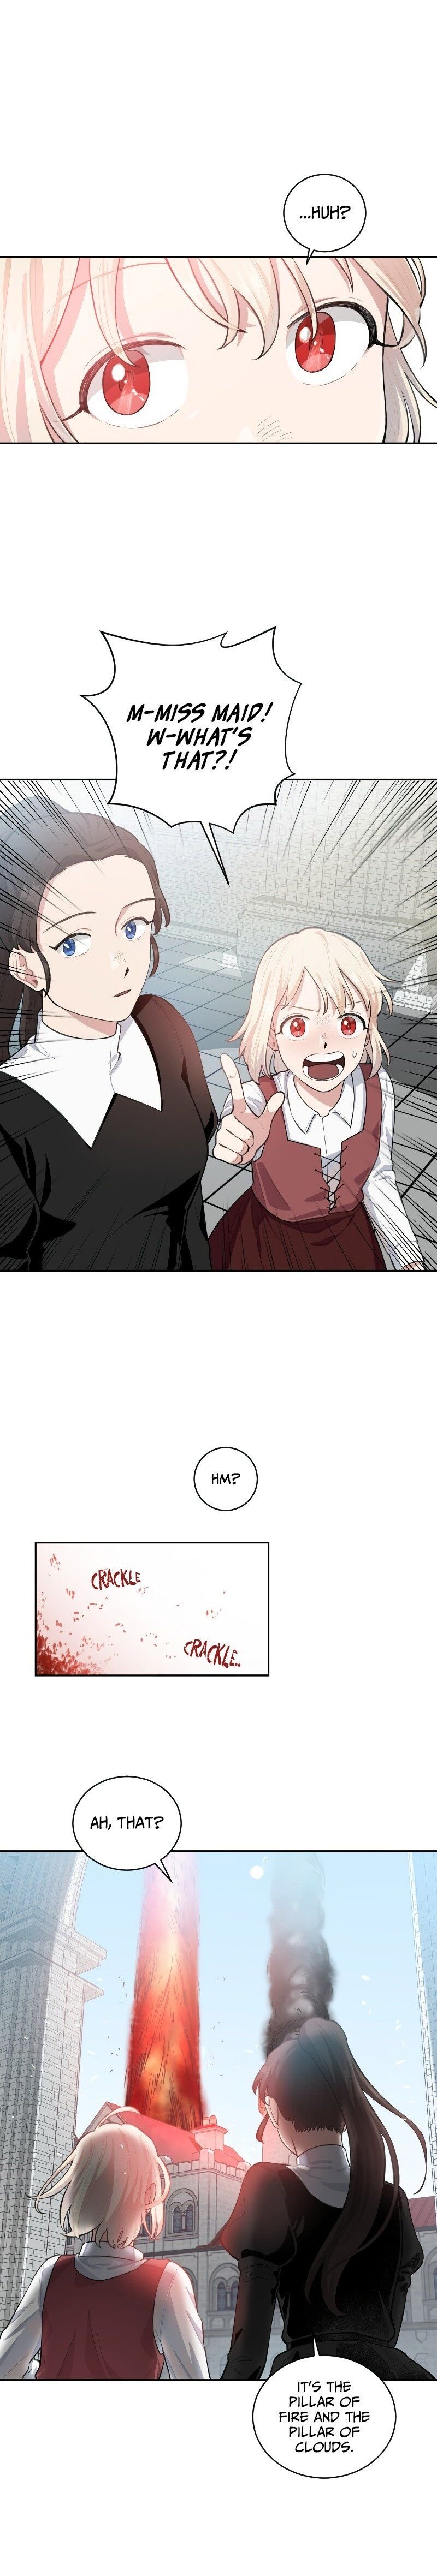 I Became a Maid in a TL Novel Chapter 2 - Page 11